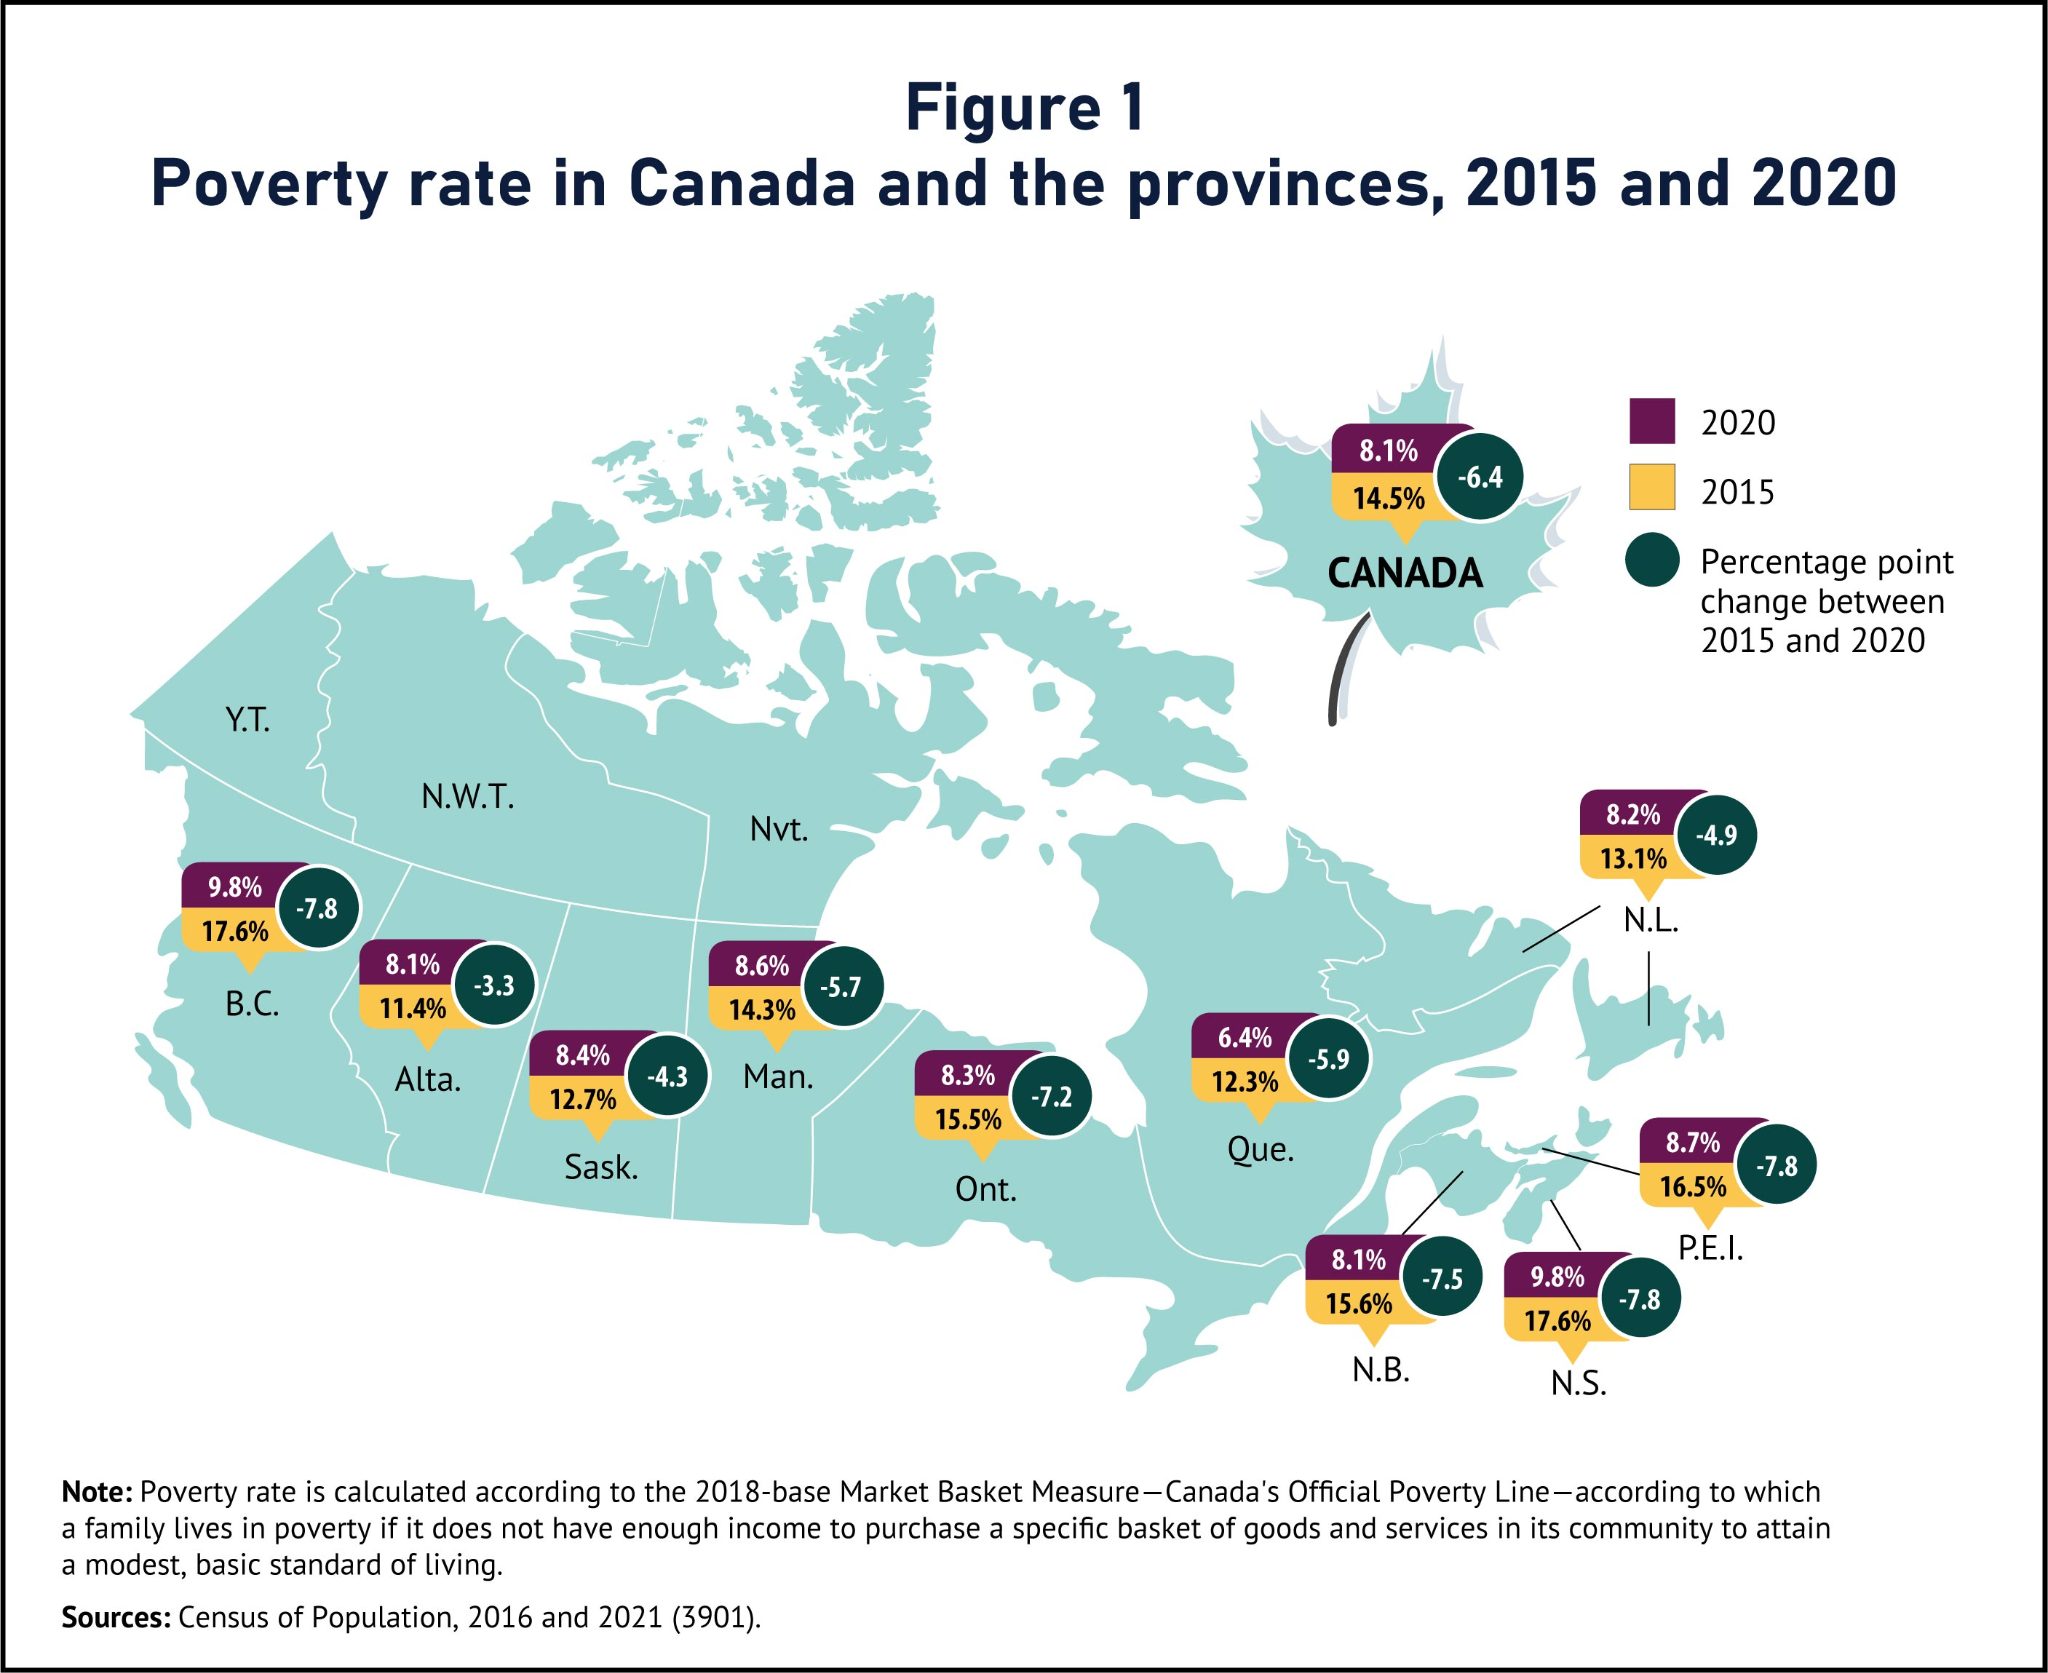 Poverty rate in Canada